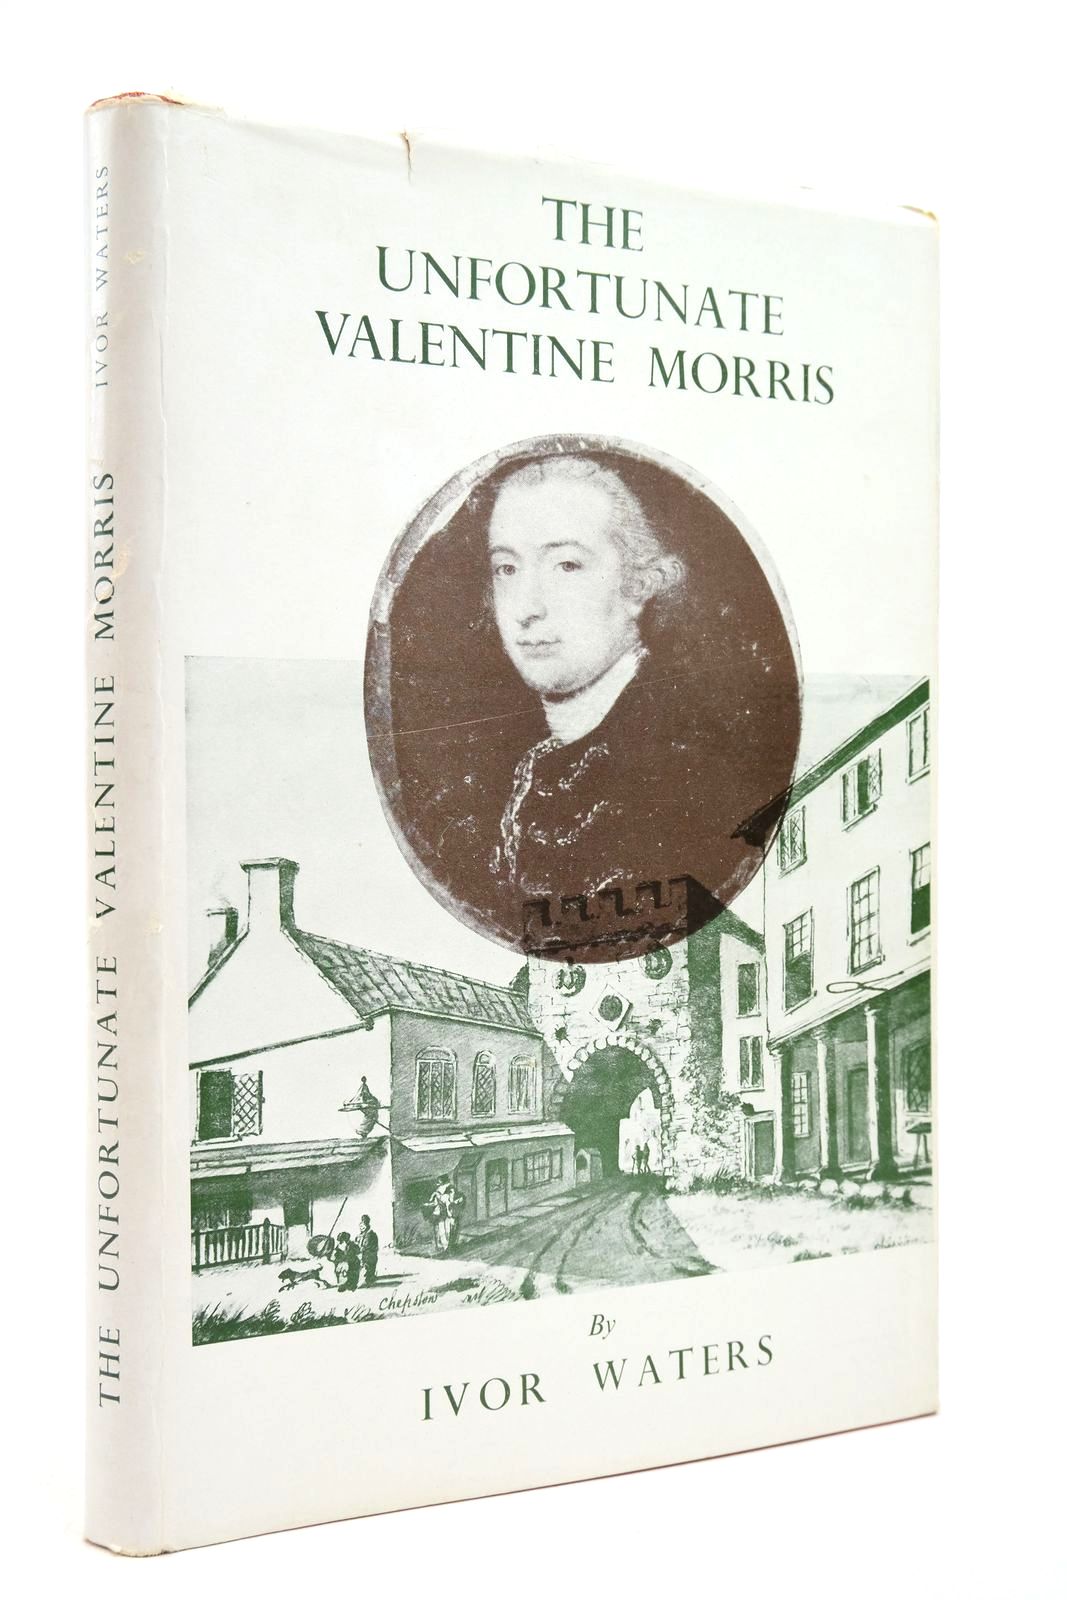 Photo of THE UNFORTUNATE VALENTINE MORRIS written by Waters, Ivor published by The Chepstow Society (STOCK CODE: 2140448)  for sale by Stella & Rose's Books